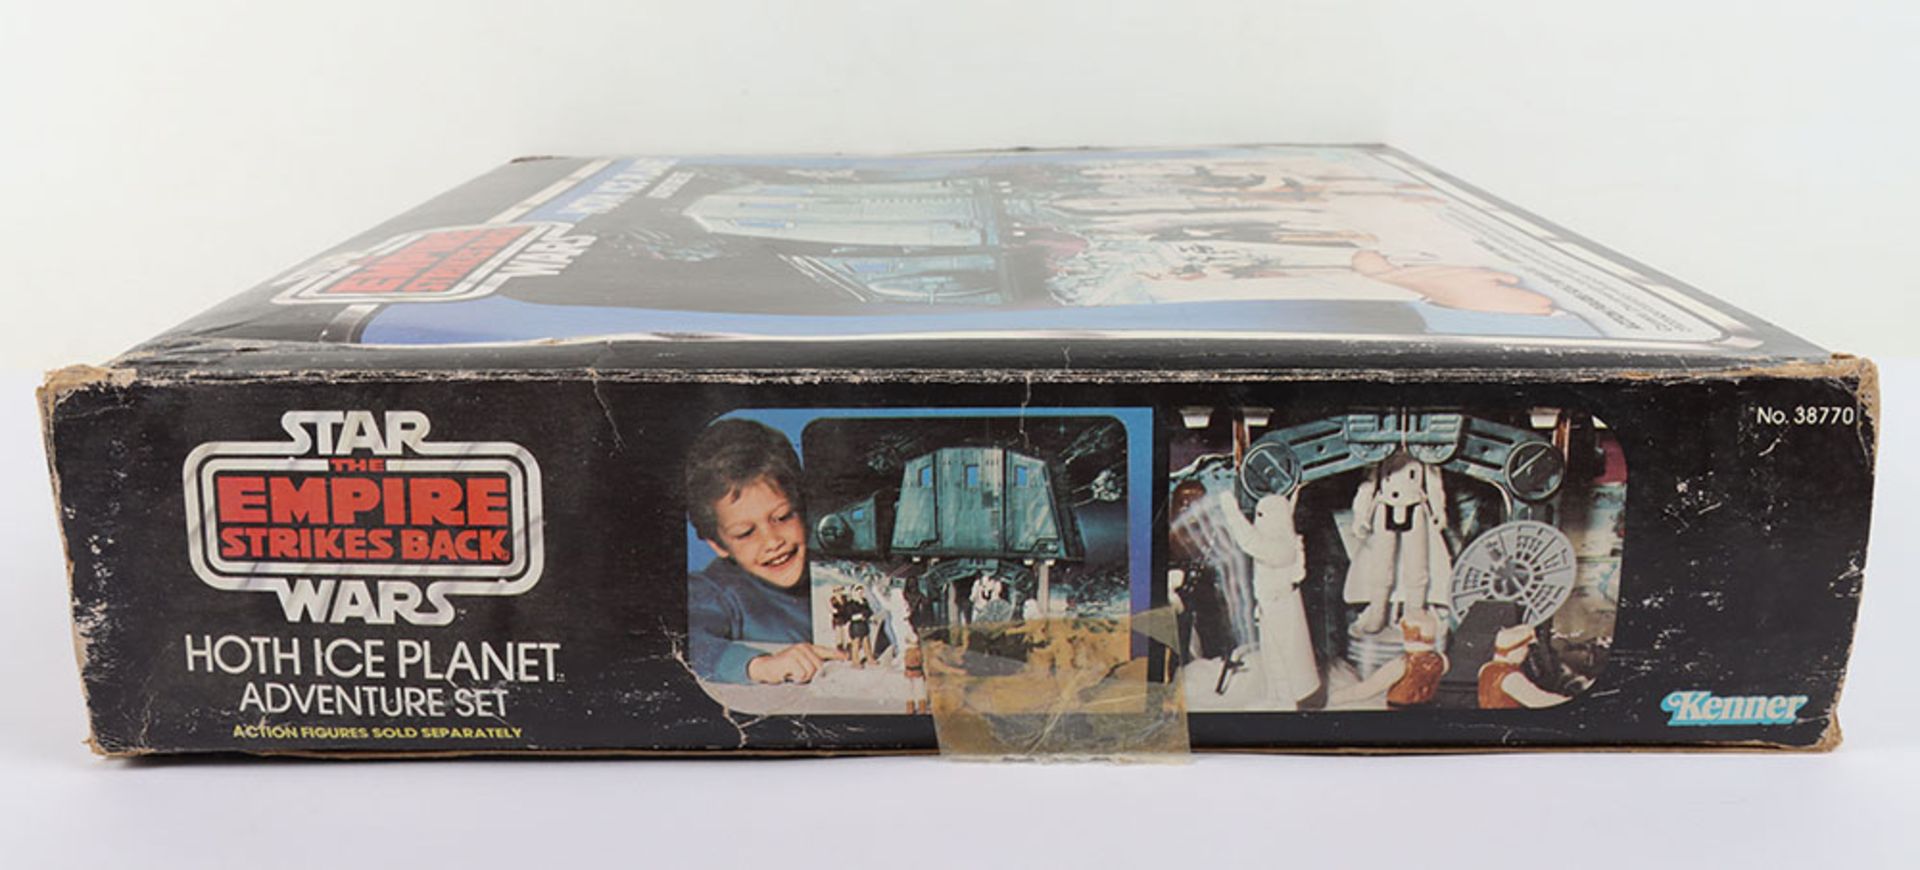 Boxed Vintage Kenner Star Wars The Empire Strikes Back Hoth Ice Planet Adventure Set - Image 16 of 16